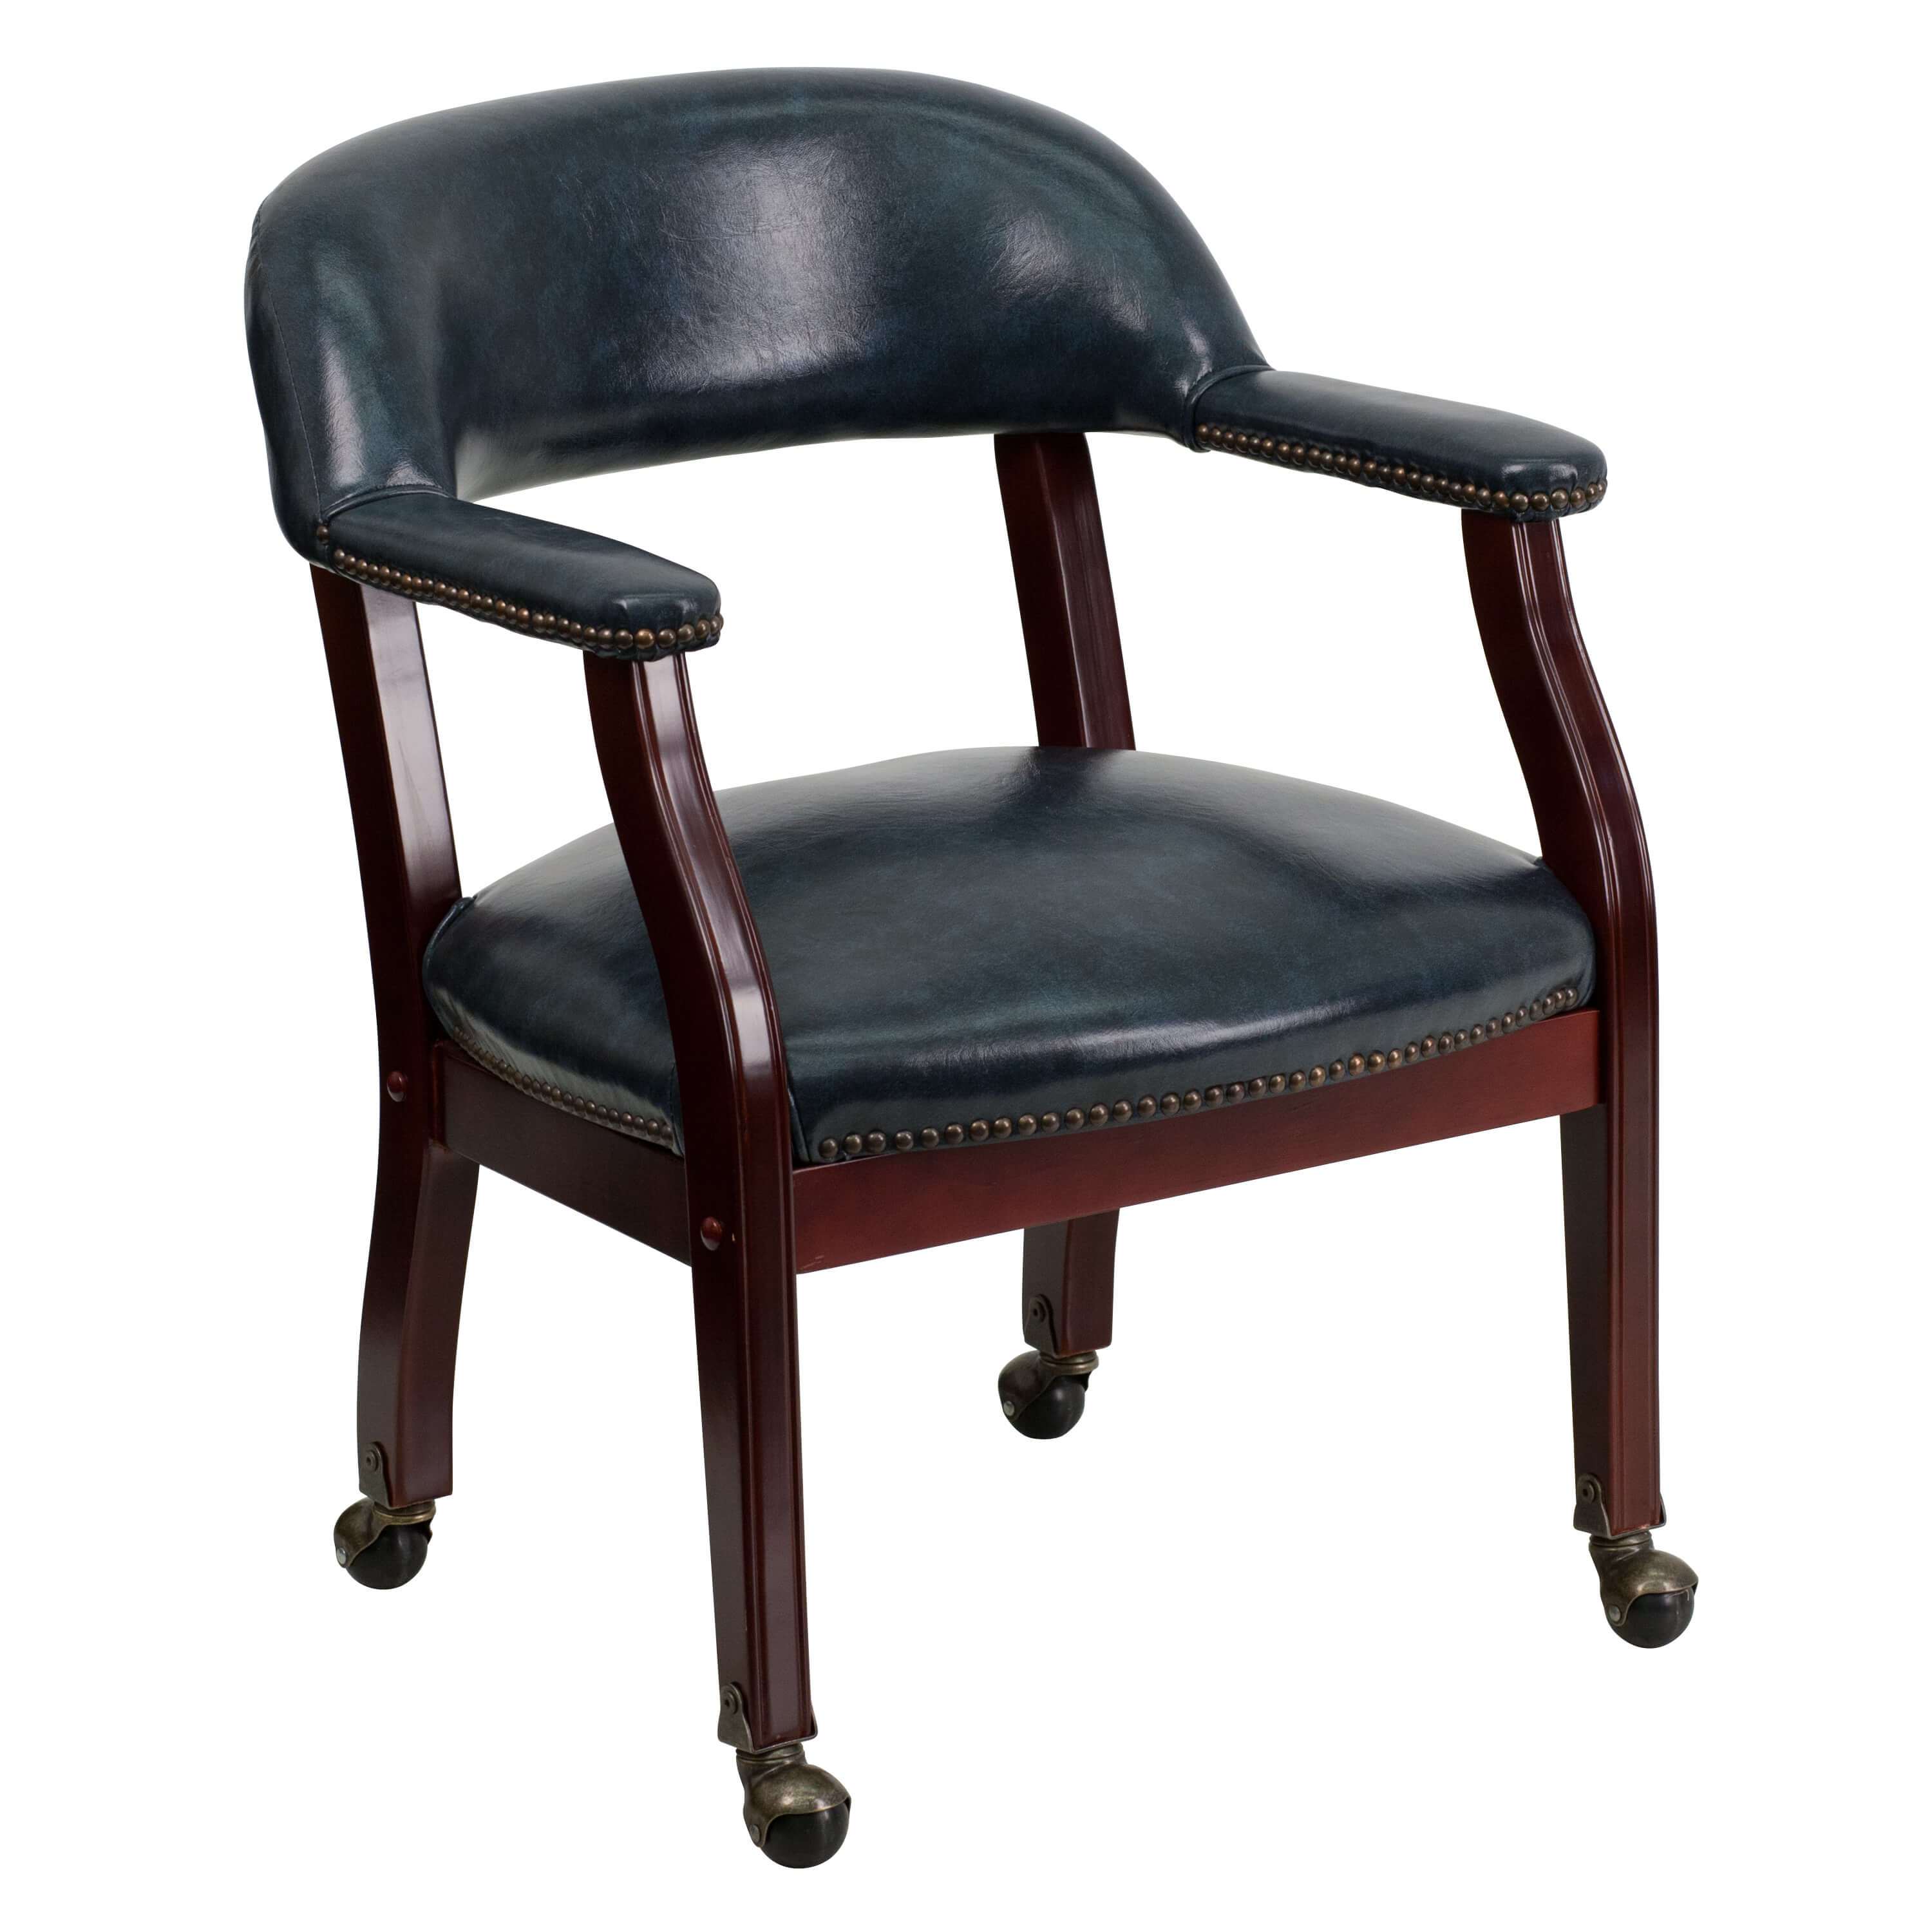 Side chairs with arms CUB B Z100 NAVY GG FLA